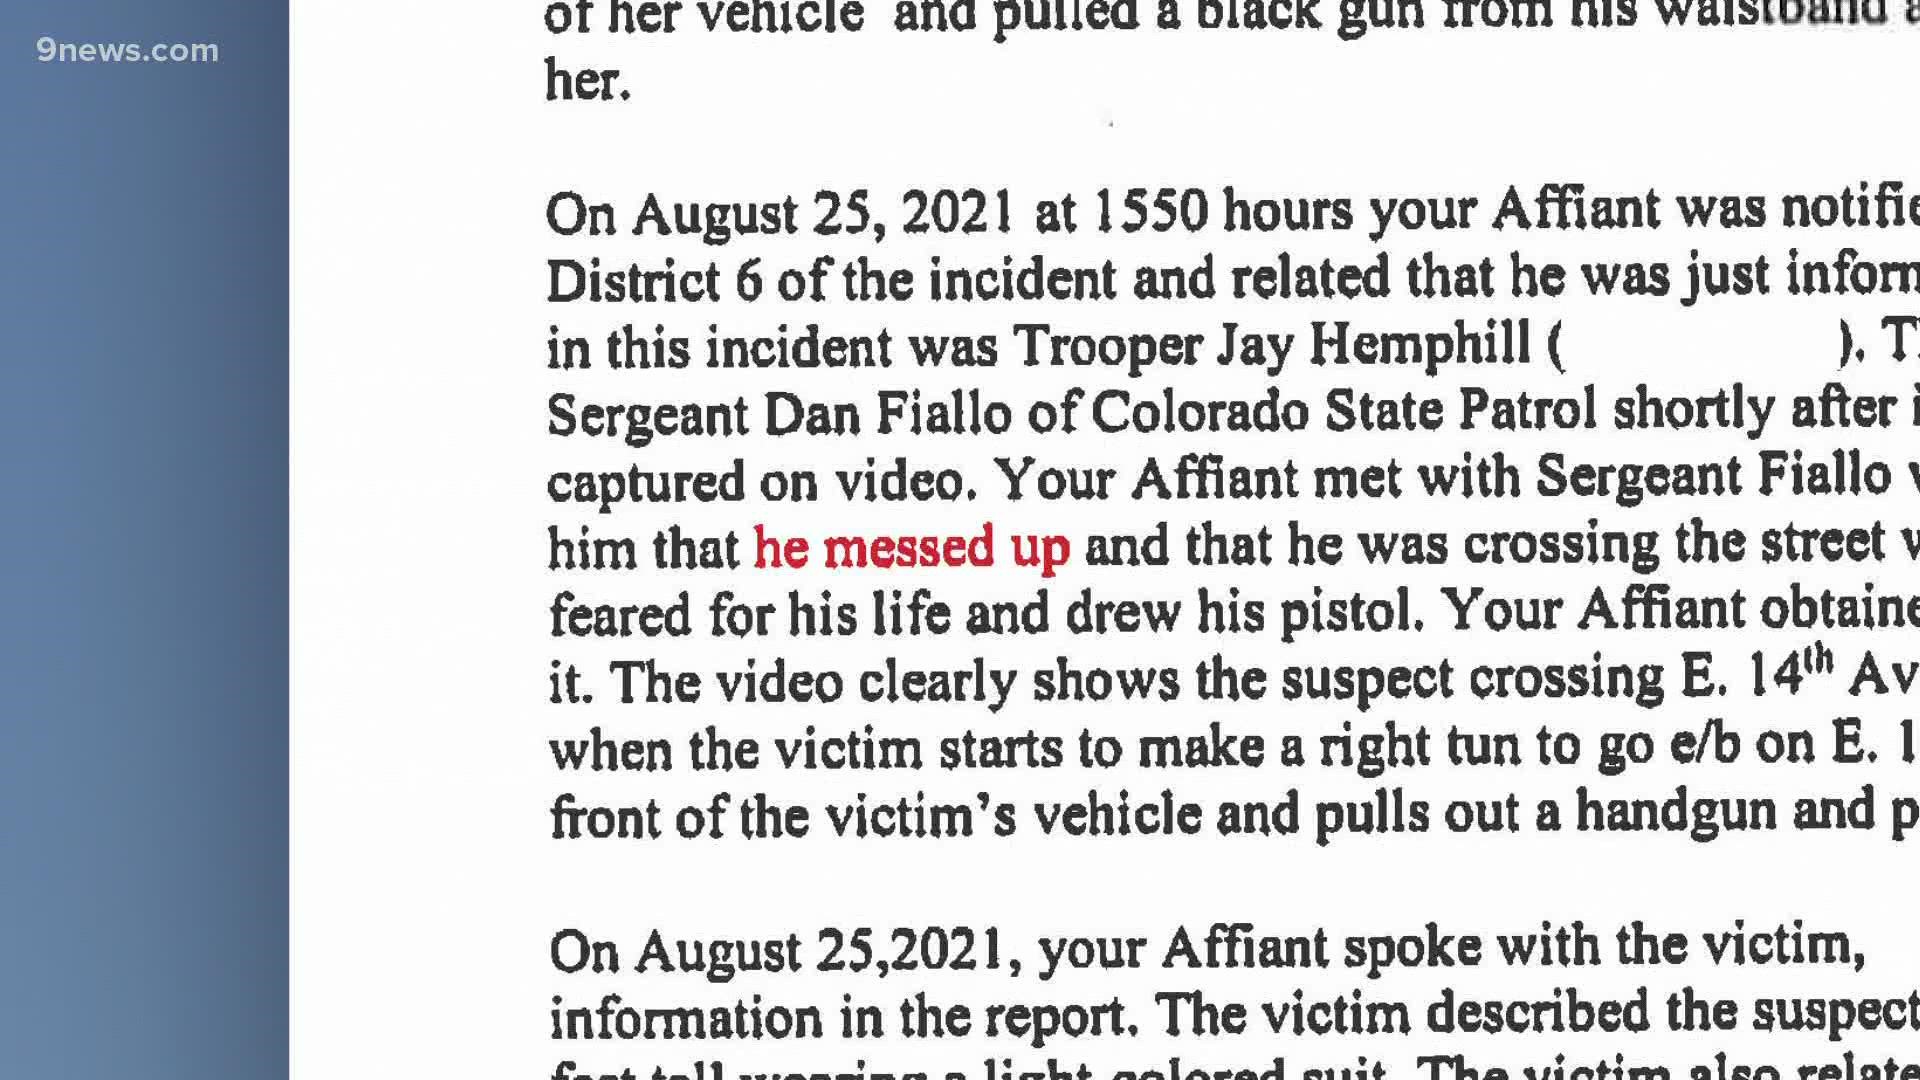 The trooper has been charged with one count of felony menacing related to the Aug. 25 incident.